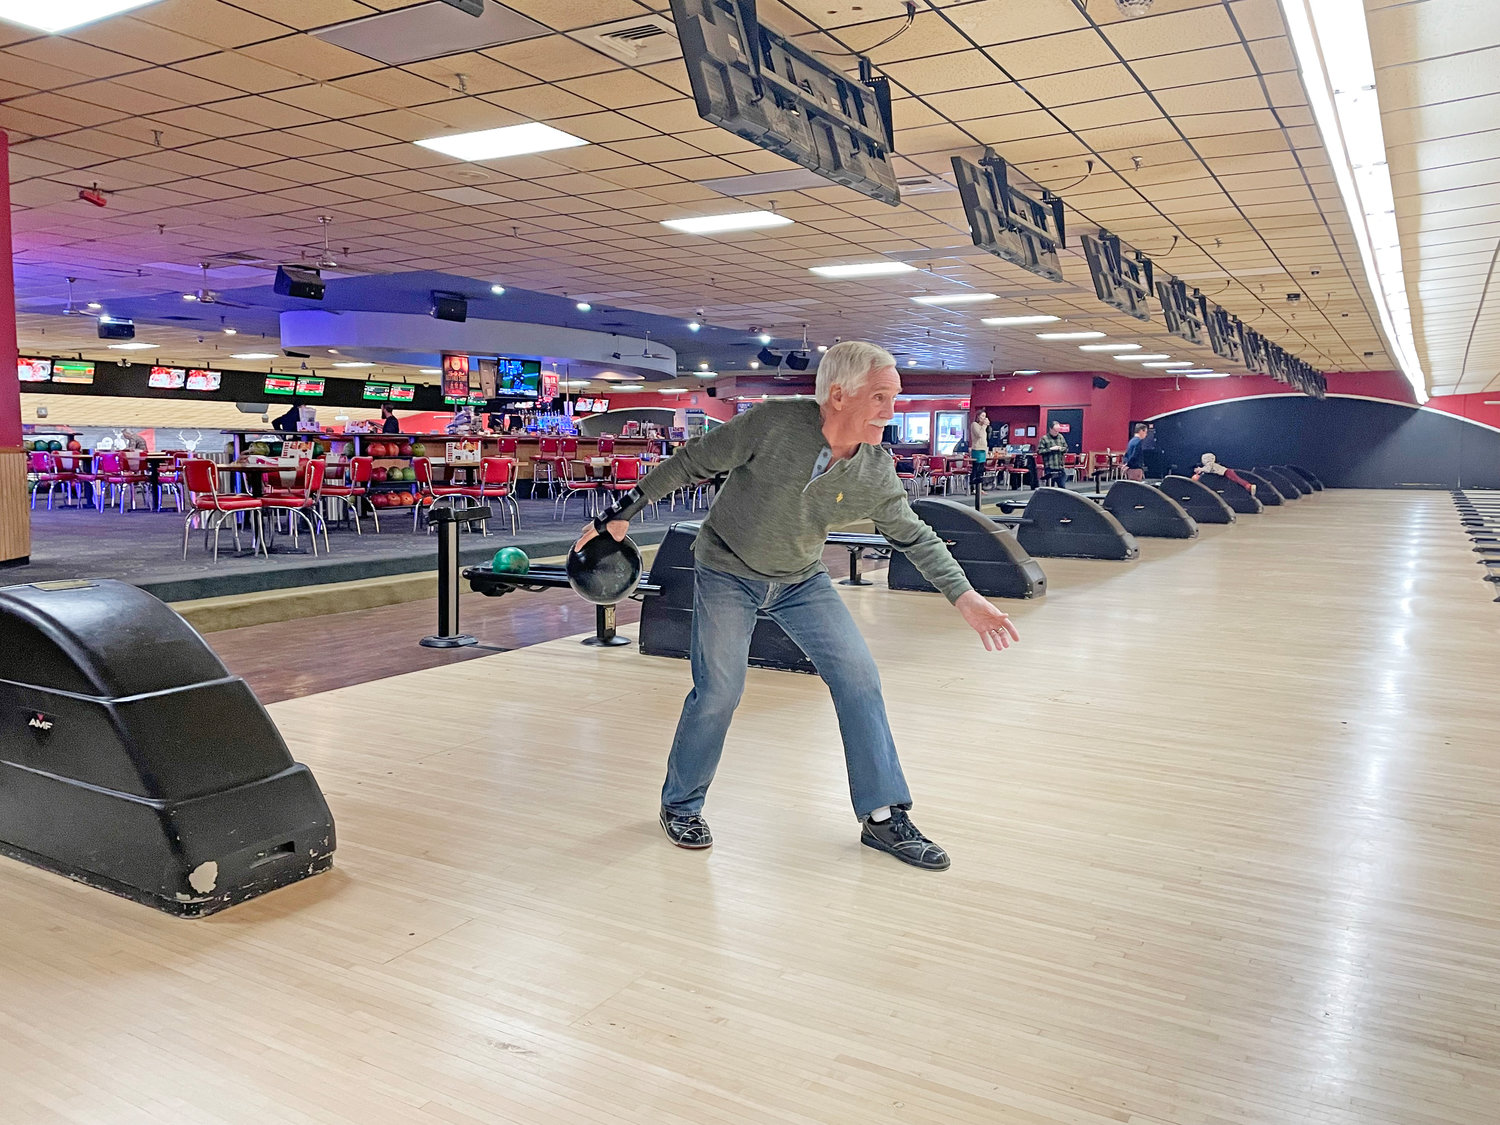 Clifford Crandall Jr. demonstrates his approach at the bowling alley.